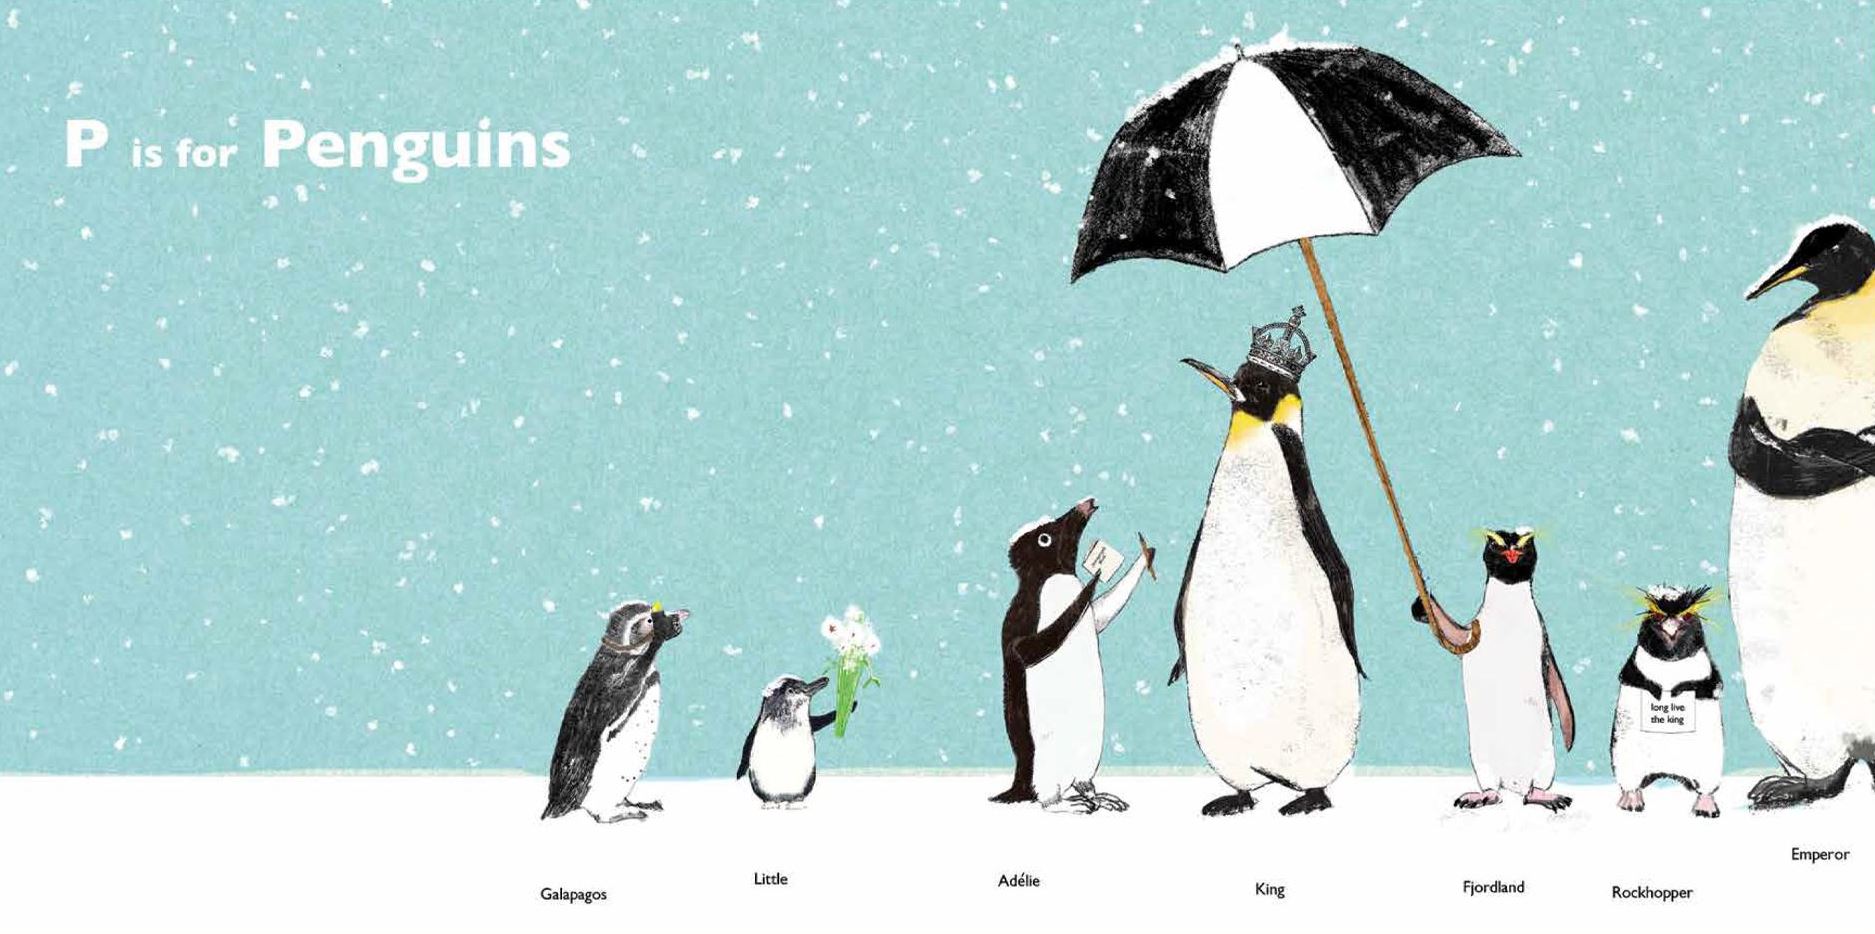 P is for Penguins